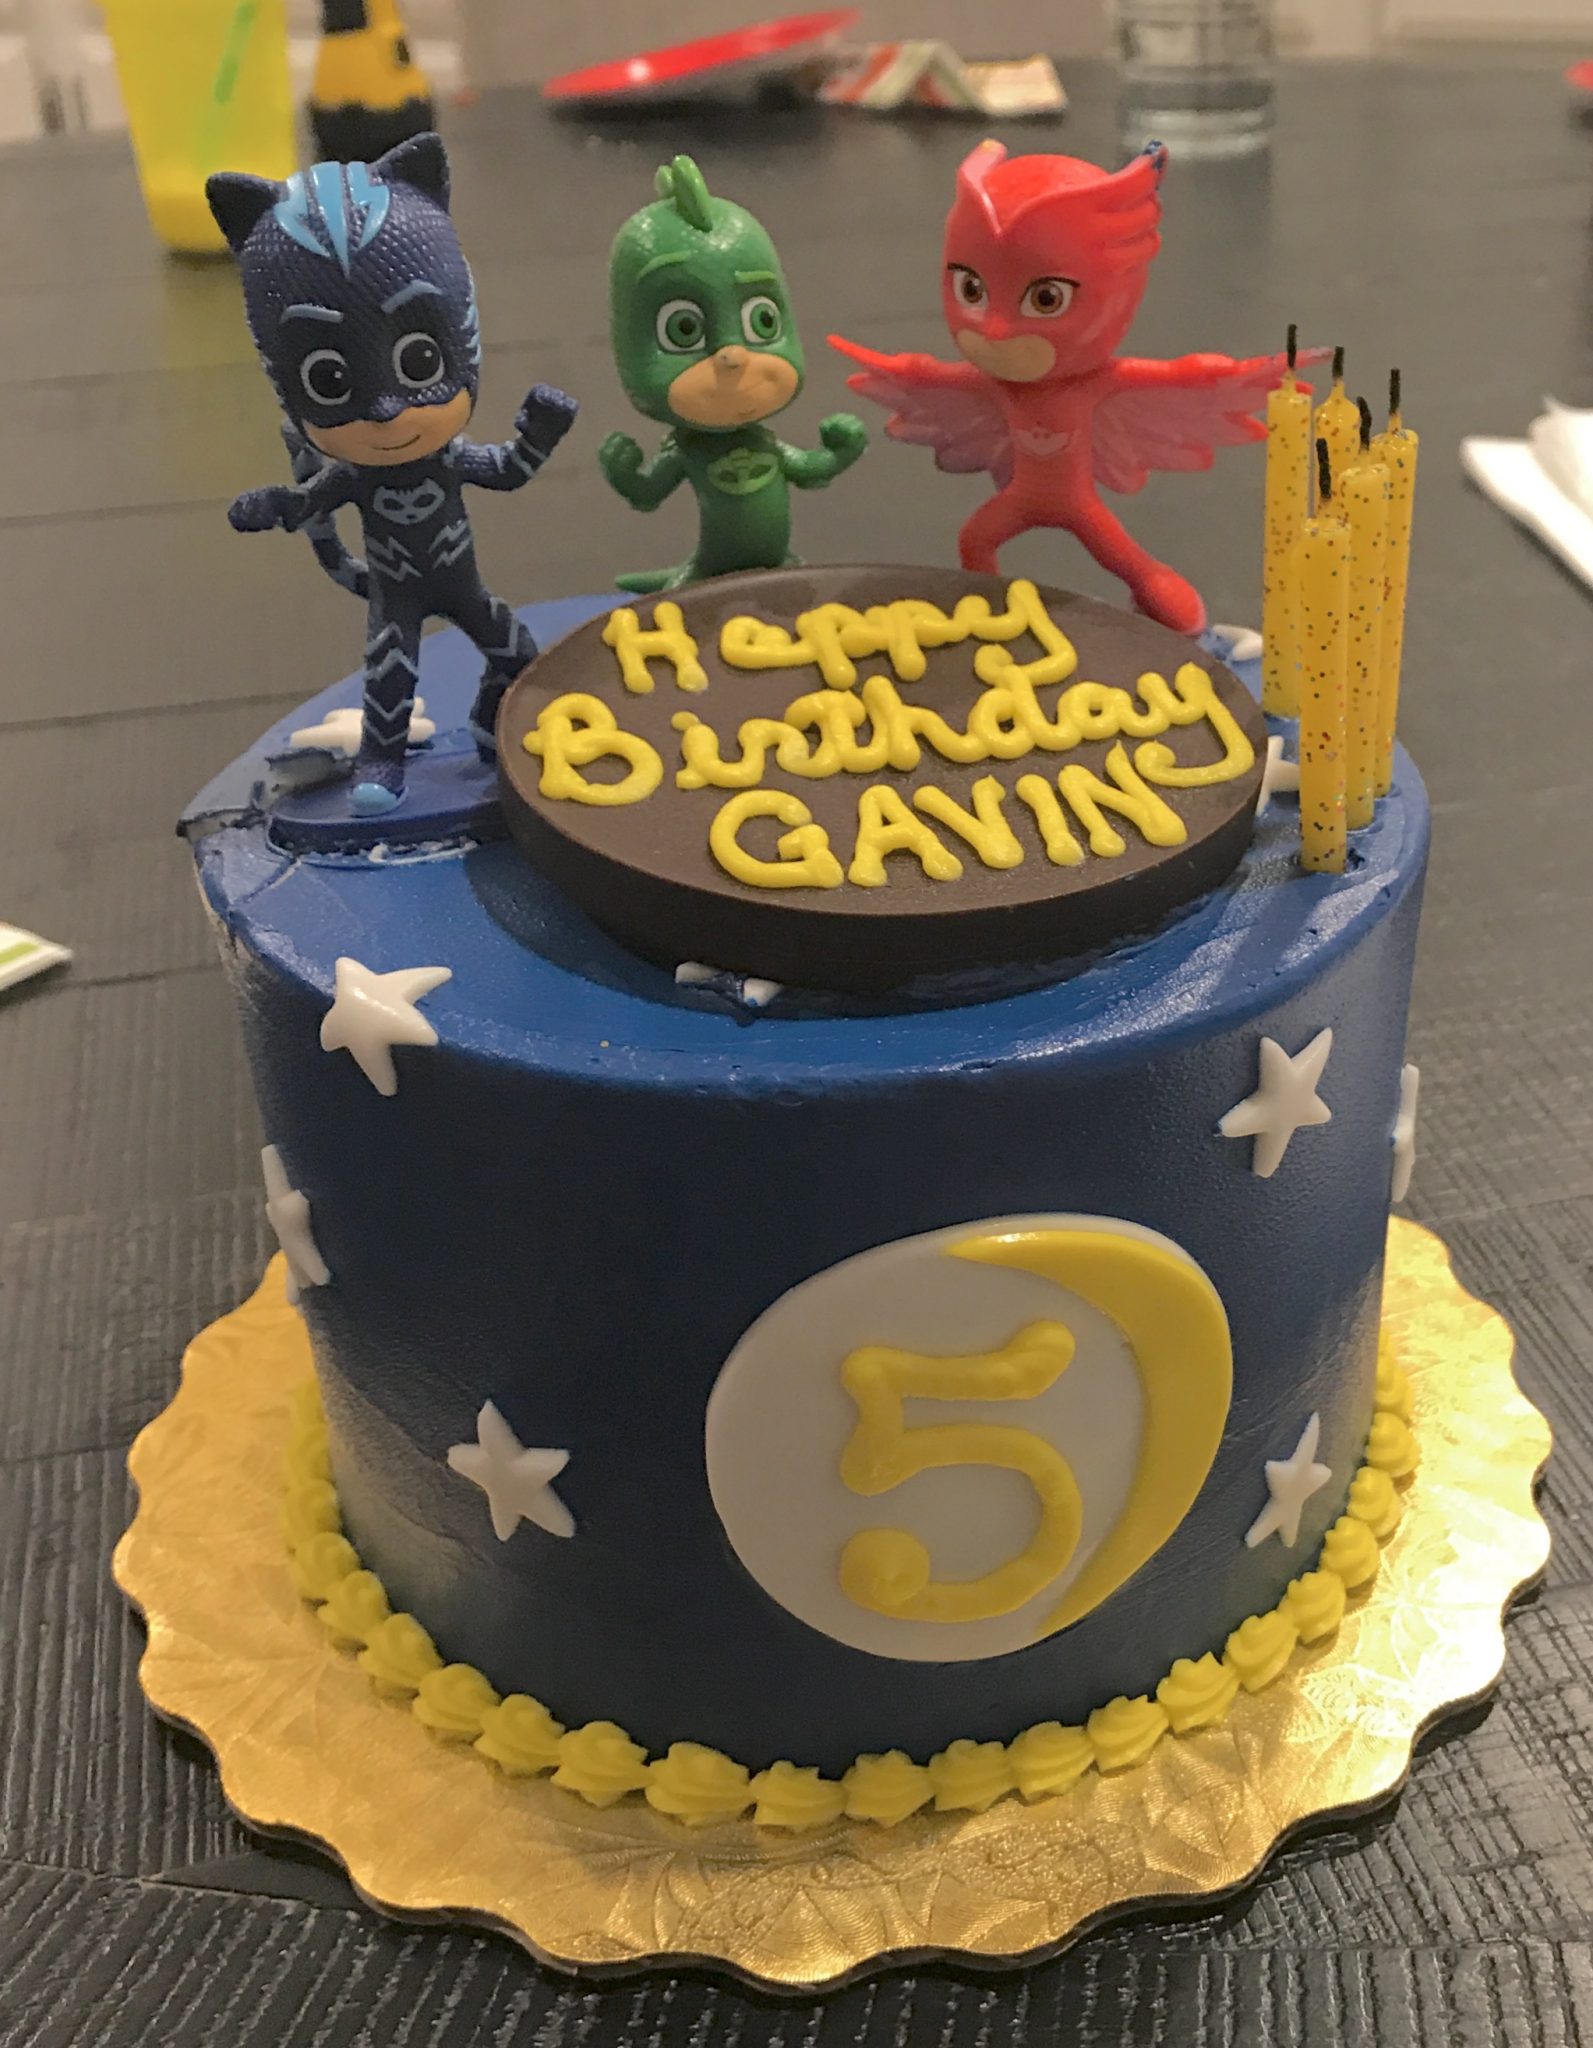 PJ Masks Birthday Cake - Complete Party DIY Plan, shopping guide, ideas and inspo! Super Gekko, Luna Girl, Owlette, and more! Cake table, backdrops, toppers, DIY!
#pjmasksparty
#pjmasks
#supergekkoparty
#supergekko
#gekkocake
#diy
#diyparty
#partyideas
#kidsparties
#genderneutralparties
#partyfavors